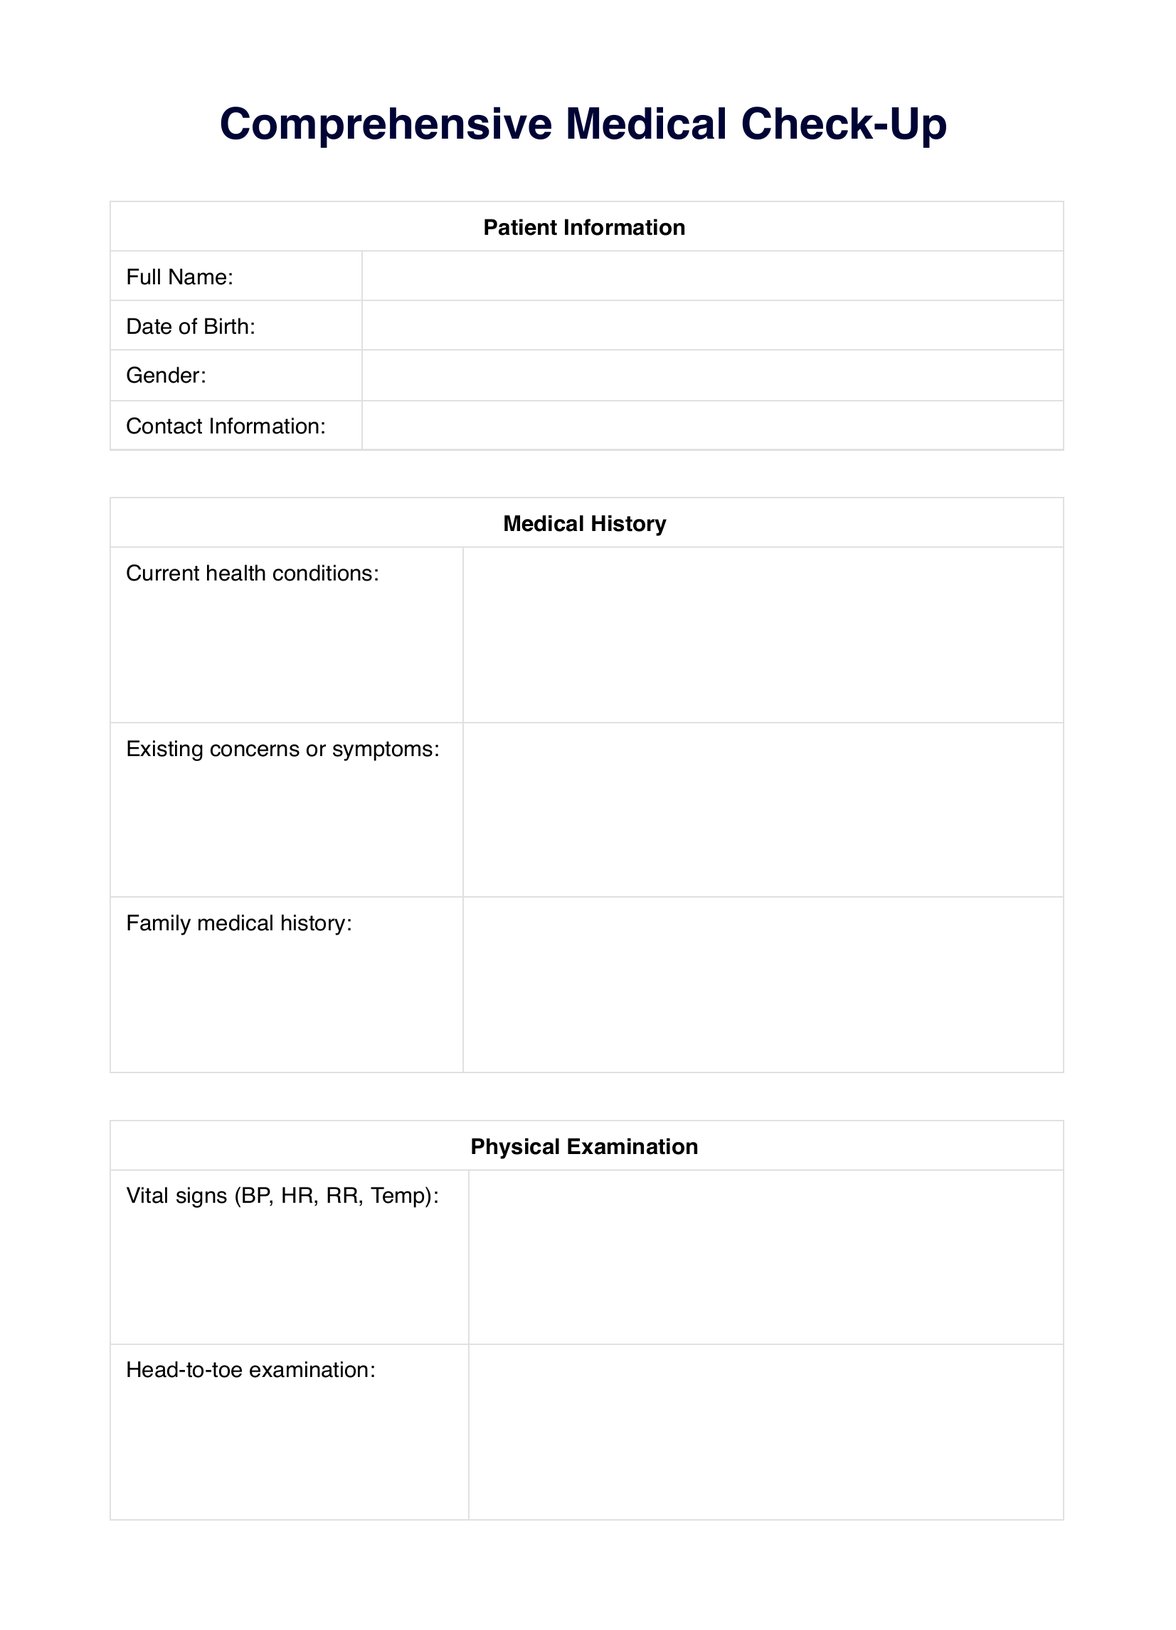 Comprehensive Medical Check Up PDF Example